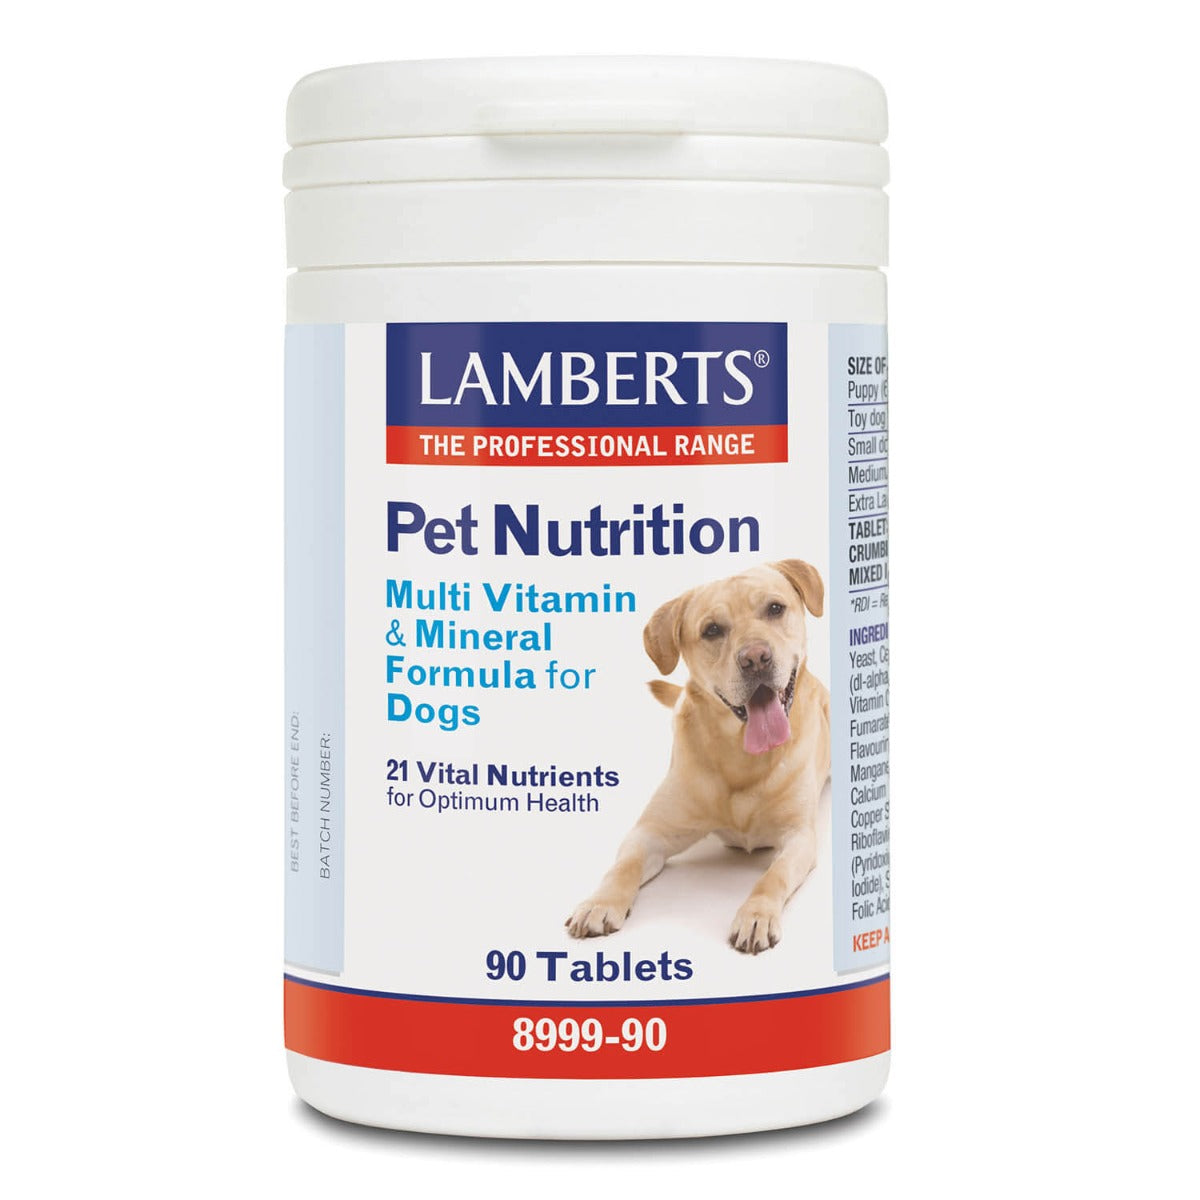 lamberts - 90 Tablets Multi Vitamin and Mineral for Dogs